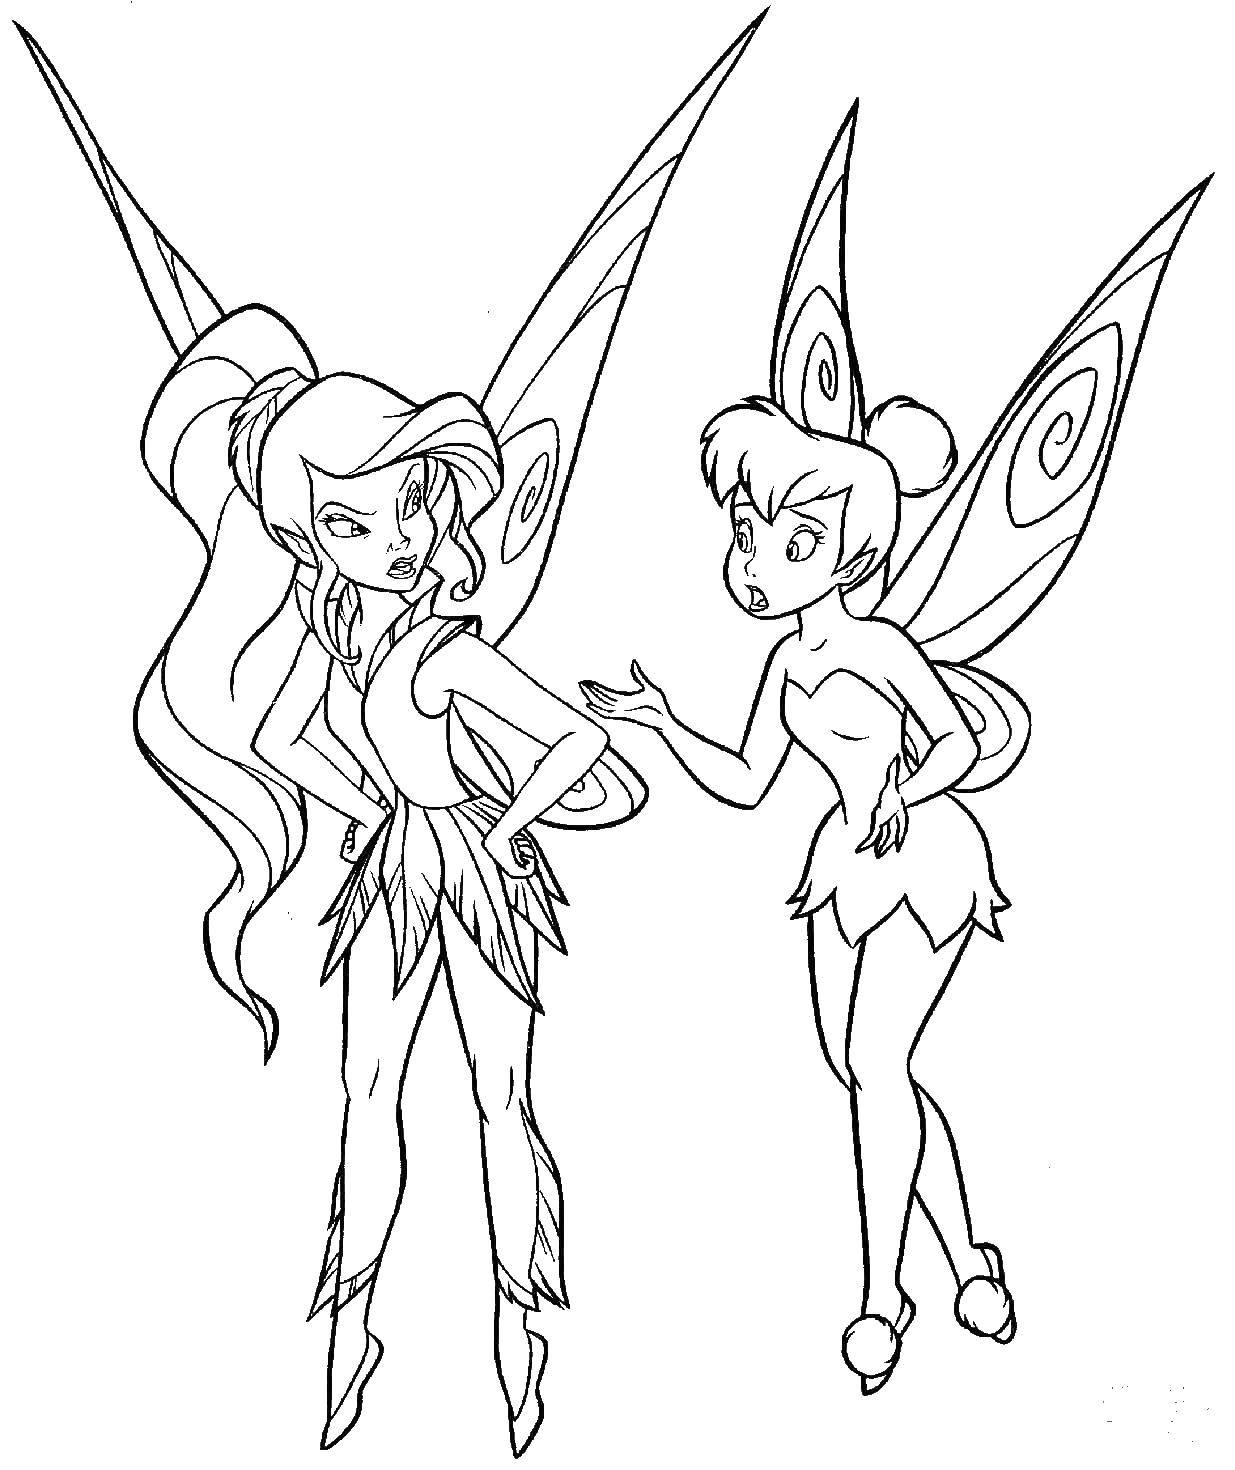 Coloring Vidia and Tinker bell. Category Fantasy. Tags:  Fairy, forest, fairy tale.